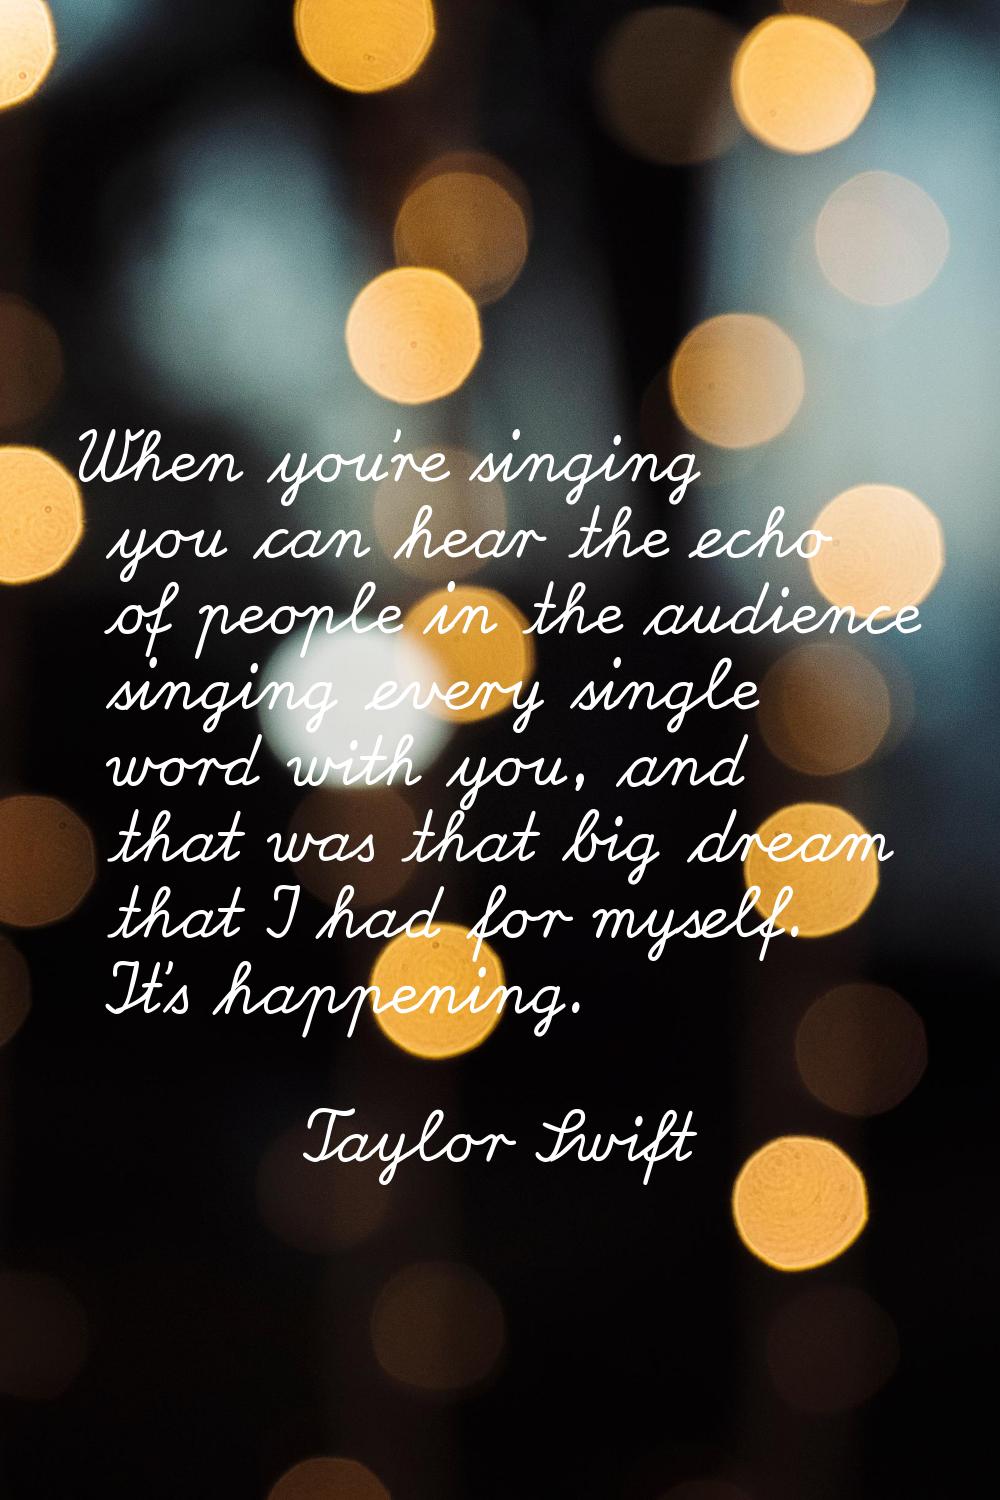 When you're singing you can hear the echo of people in the audience singing every single word with 